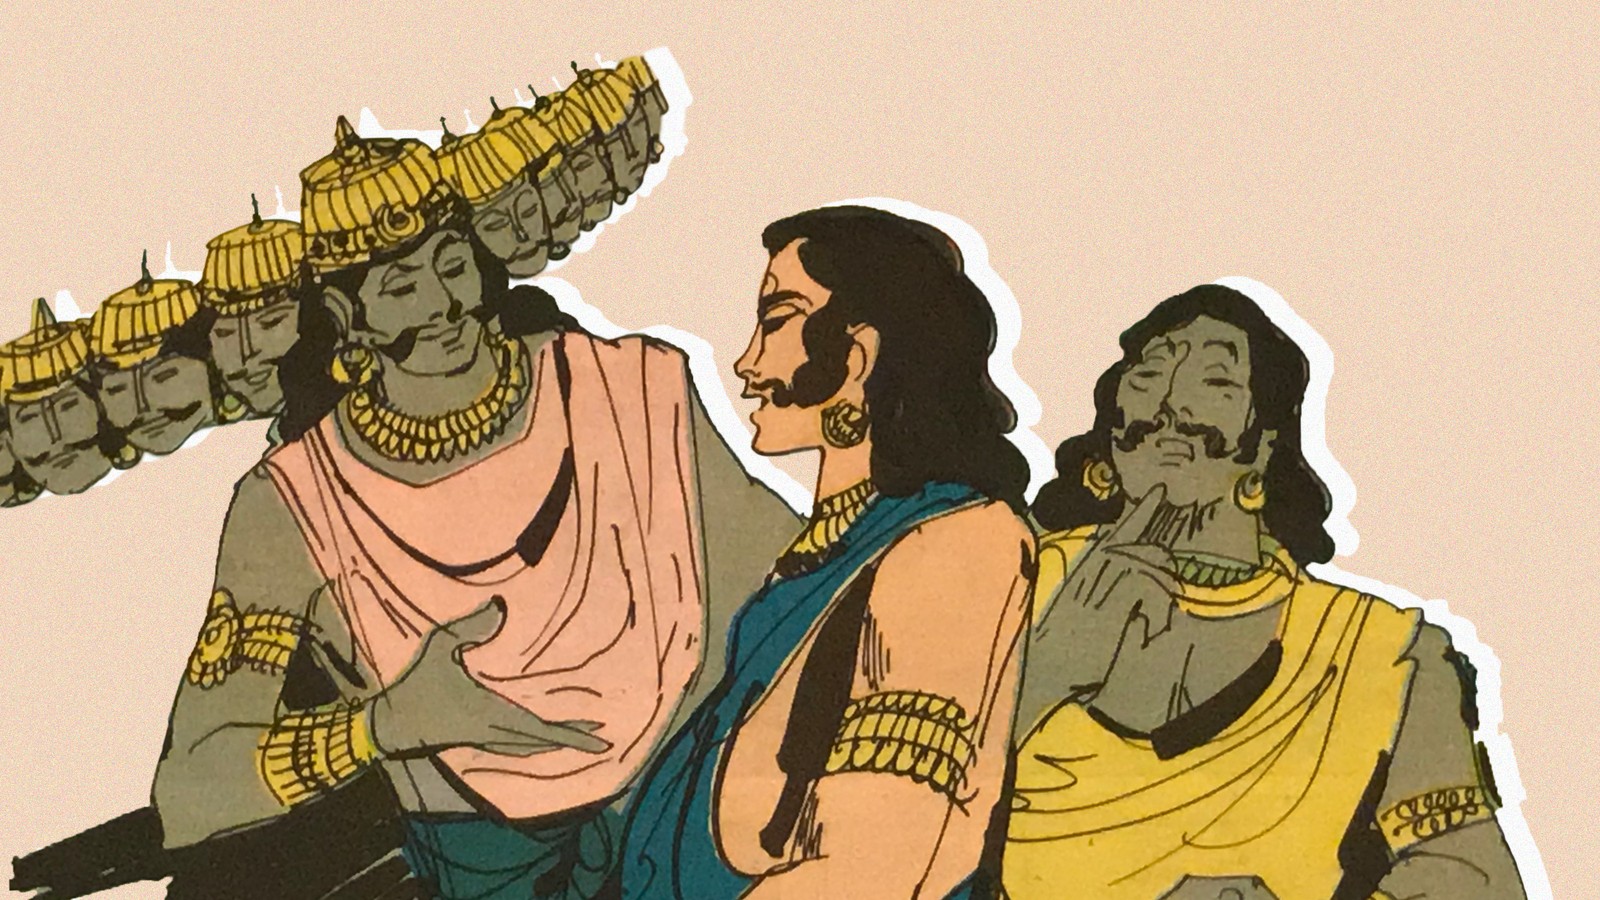 Teacher Student Porn Comics - Amar Chitra Katha: The Dark Side of the Comics That Redefined Hinduism -  The Atlantic